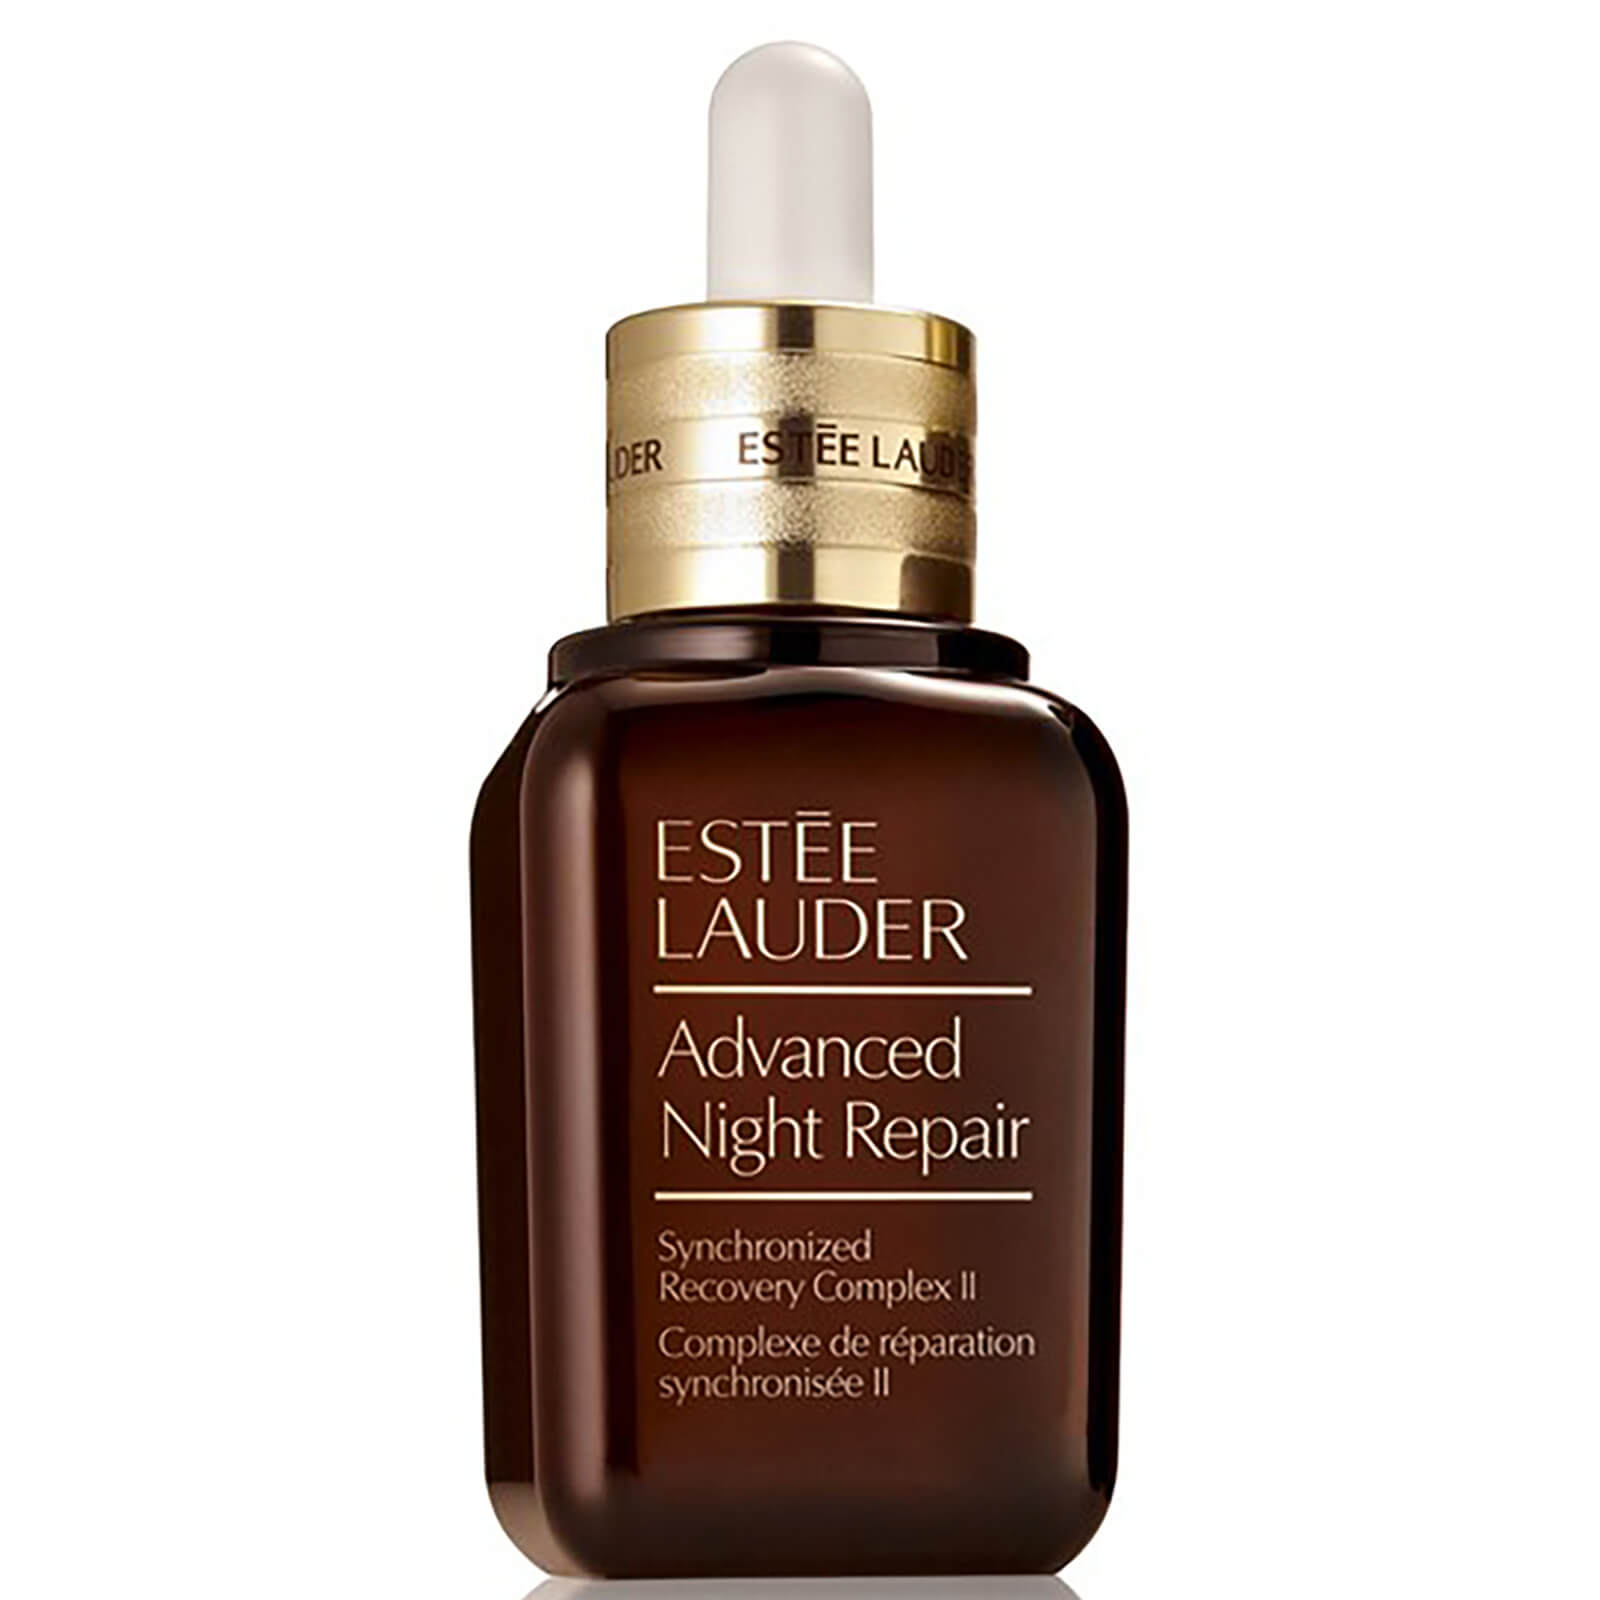 11 Best Face Serum For Hydrated and Glowing Skin